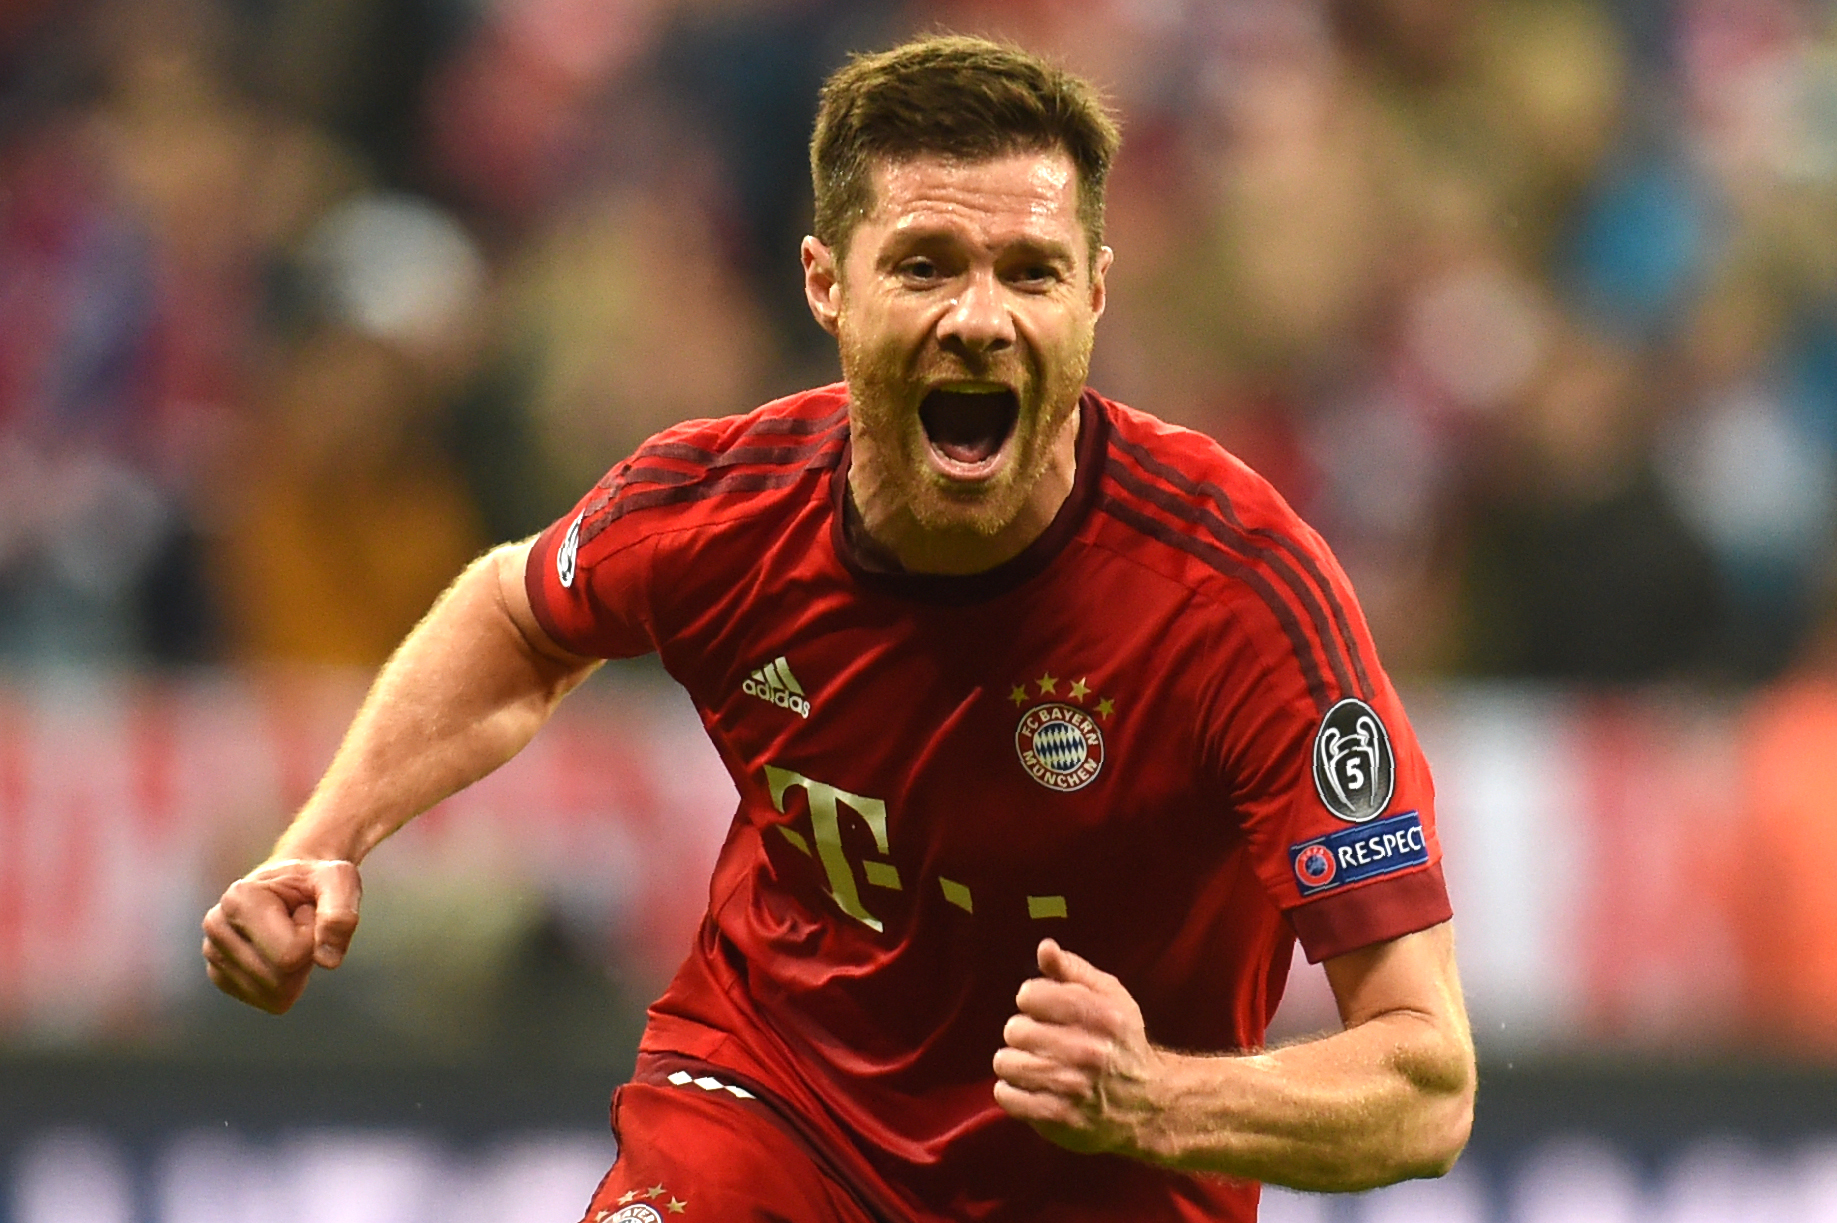 TOPSHOT - Bayern Munich's Spanish midfielder Xabi Alonso celebrates scoring during the UEFA Champions League semi-final, second-leg football match between FC Bayern Munich and Atletico Madrid in Munich, southern Germany, on May 3, 2016. / AFP / Christof Stache        (Photo credit should read CHRISTOF STACHE/AFP/Getty Images)